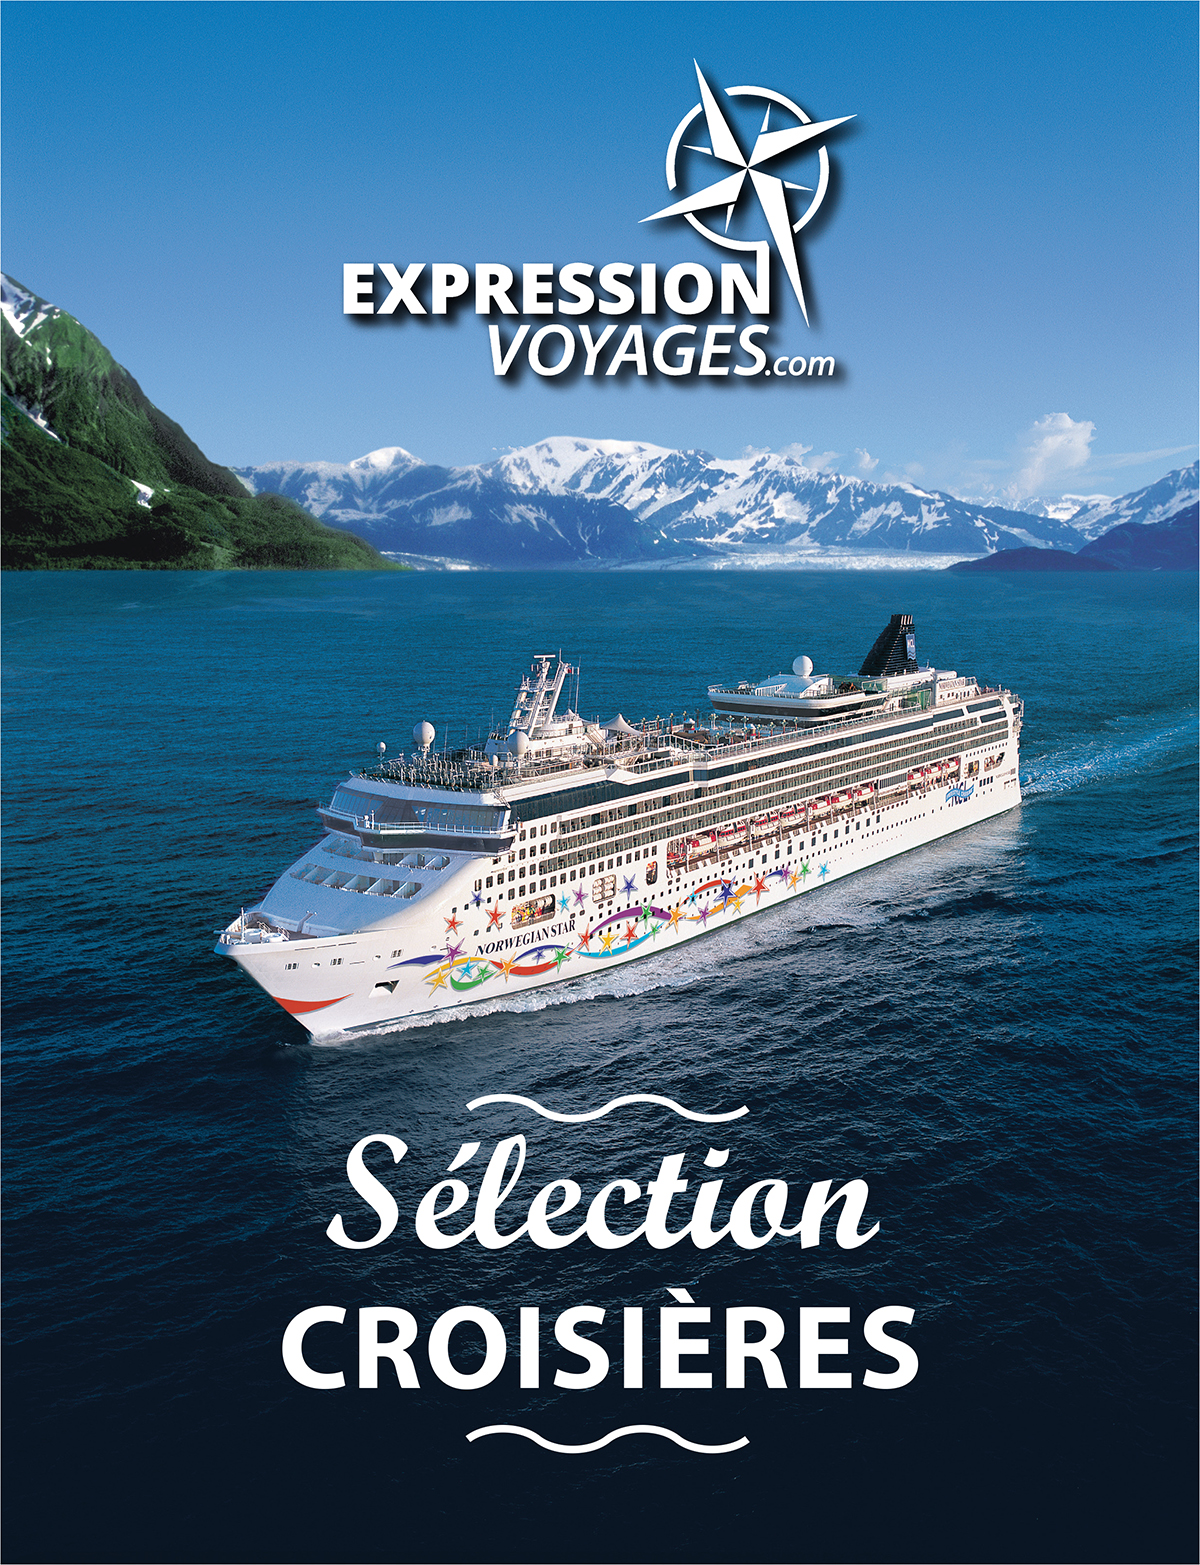 Expression-Voyages-Selection-Croisieres-VFC-HR-1200